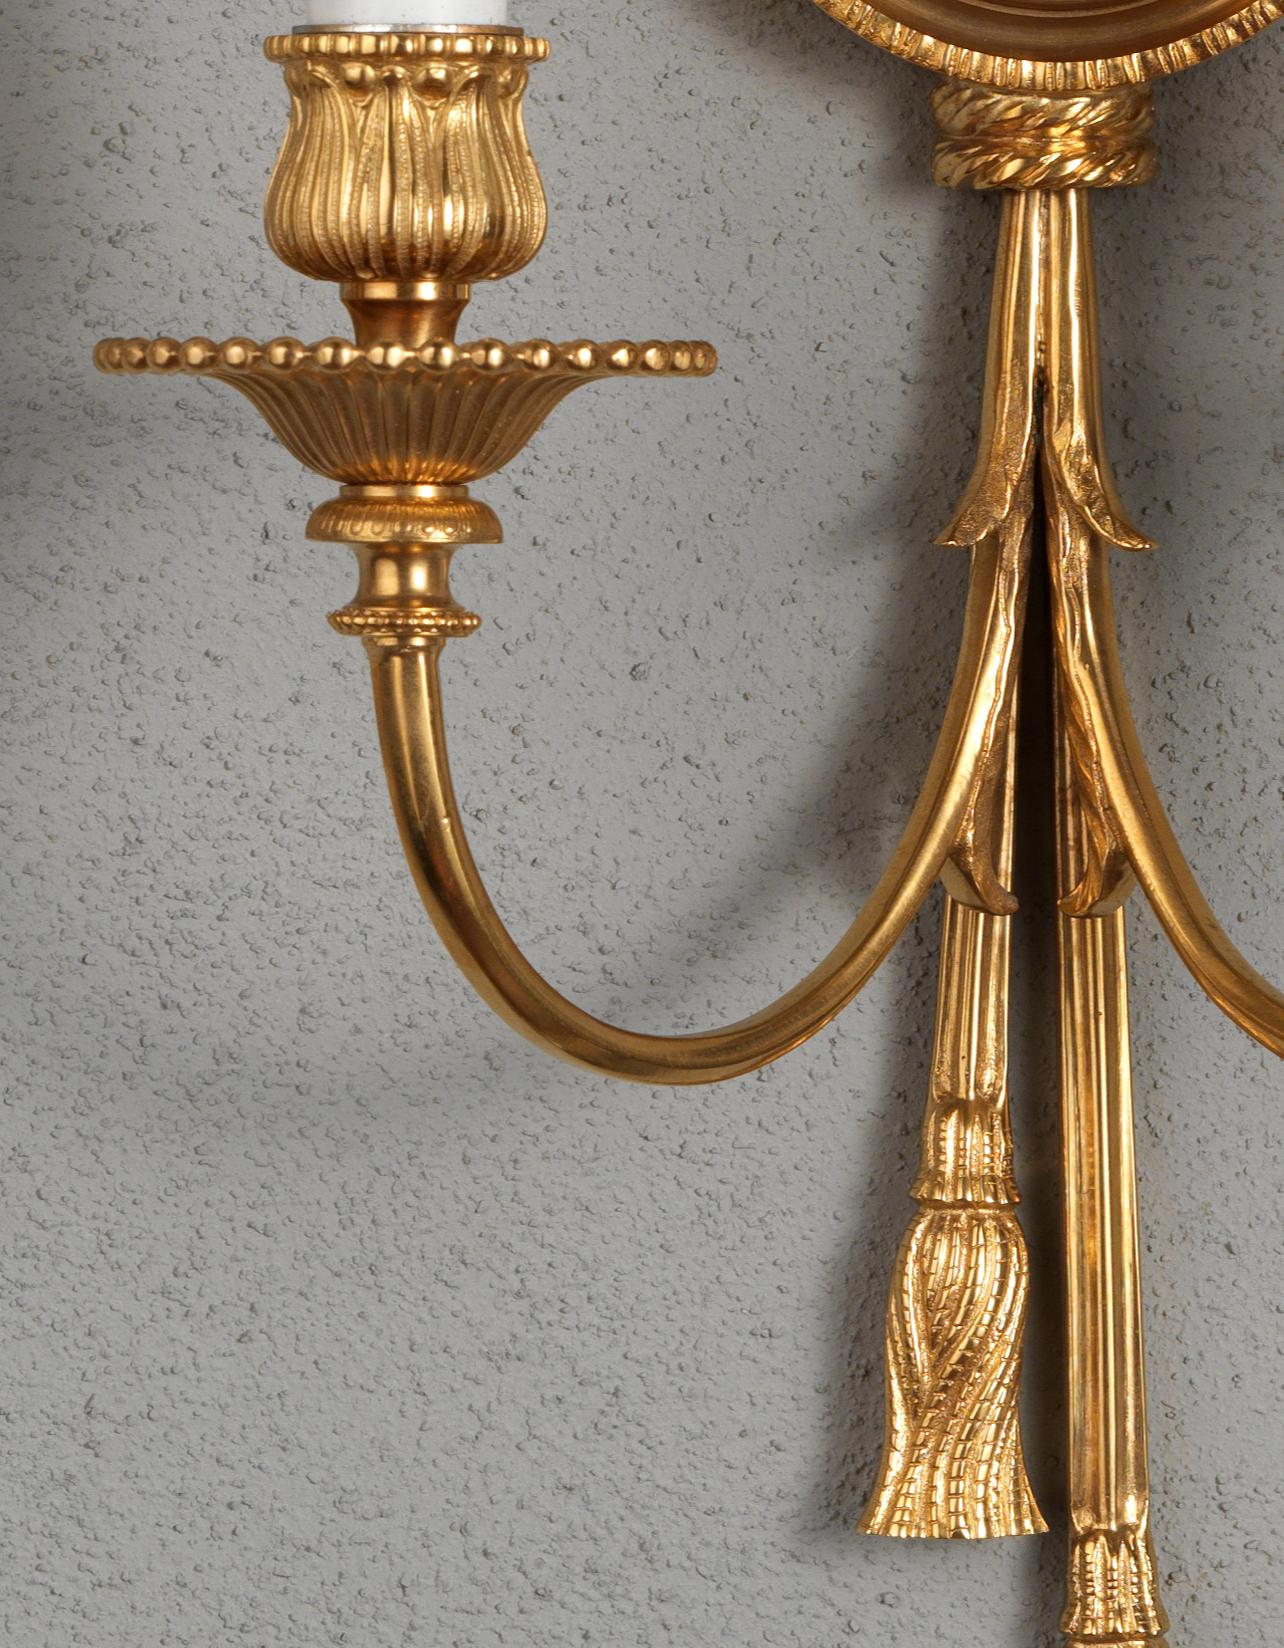 Louis XVI Style set of Gilt Bronze and Enamel Sconces by Gherardo Degli Albizzi. This fine set of wall sconces is crafted entirely of gilded bronze and decorated with elements typical of Louis XVI period such as Medusa's head in the centre and flake